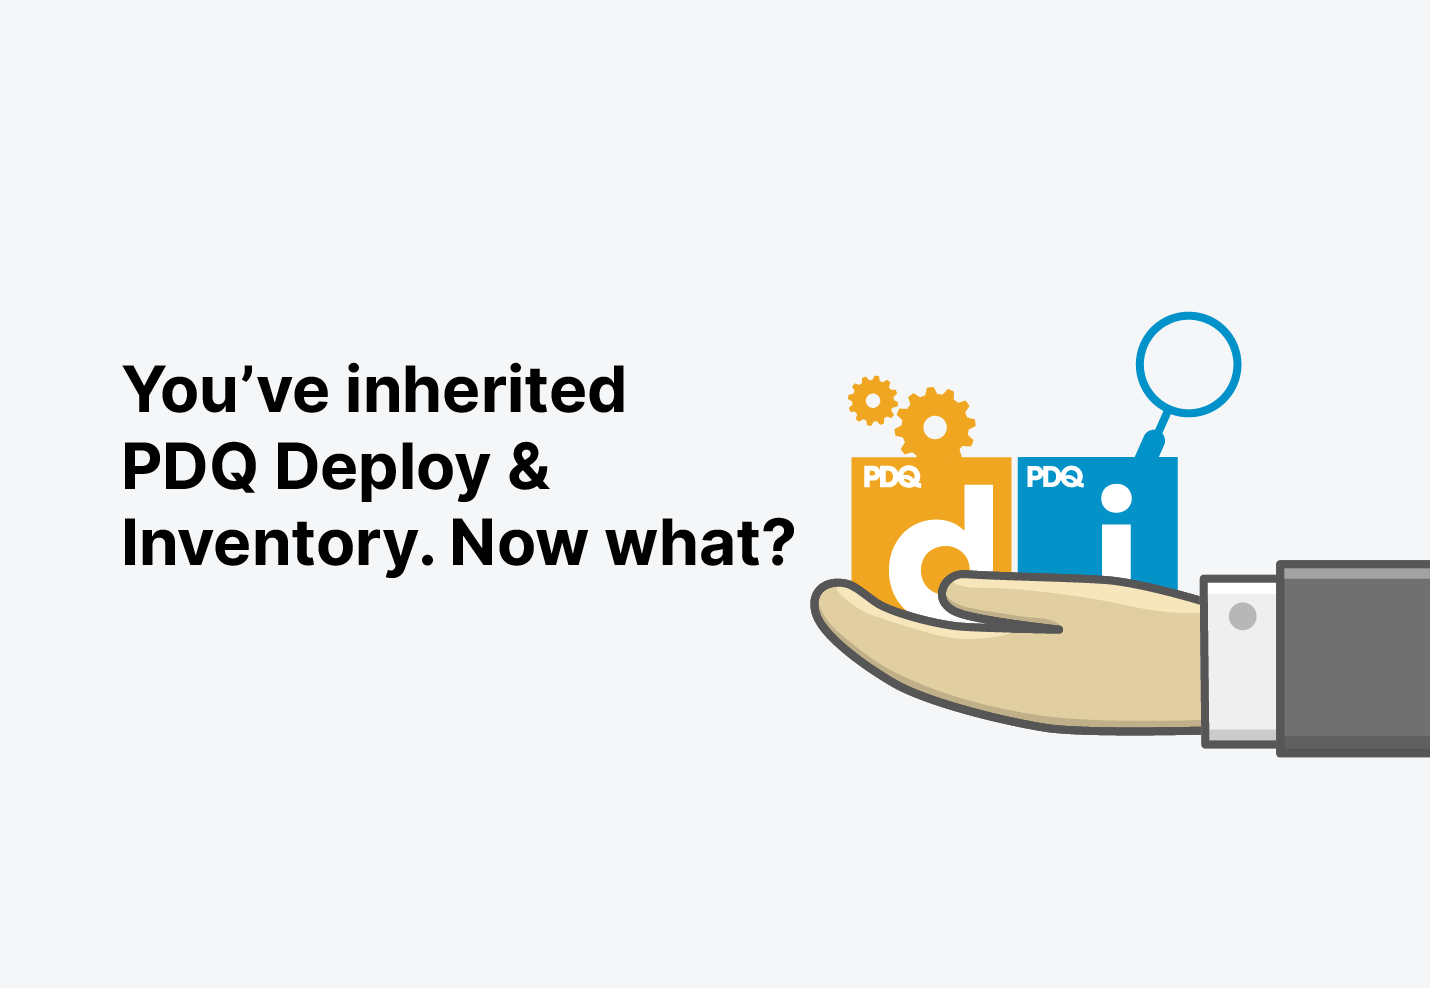 You've inherited PDQ Deploy and Inventory. Now what?